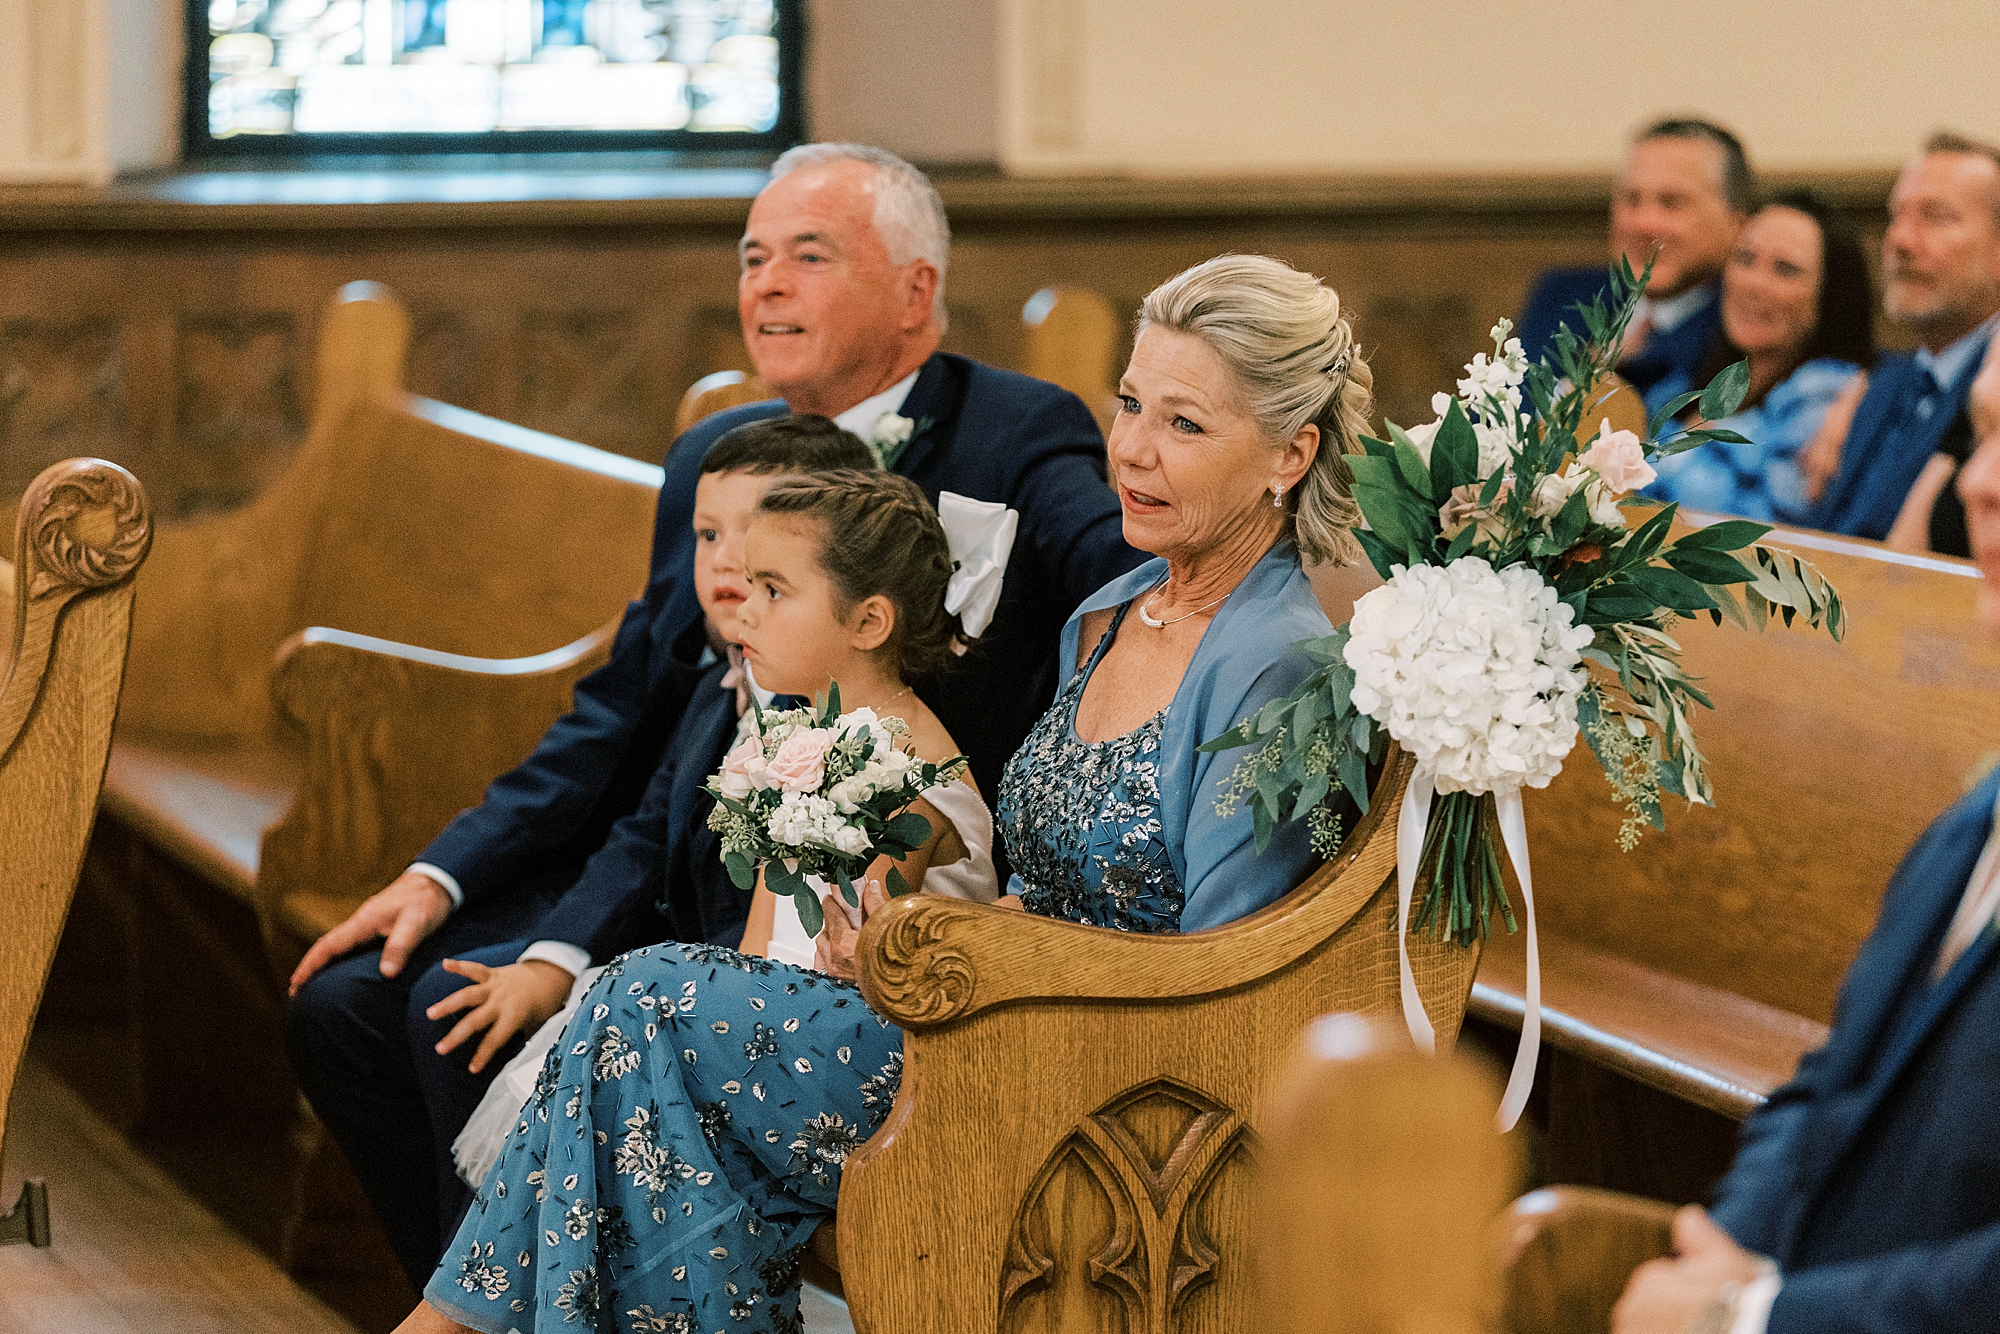 family watches traditional wedding ceremony at Philadelphia PA church